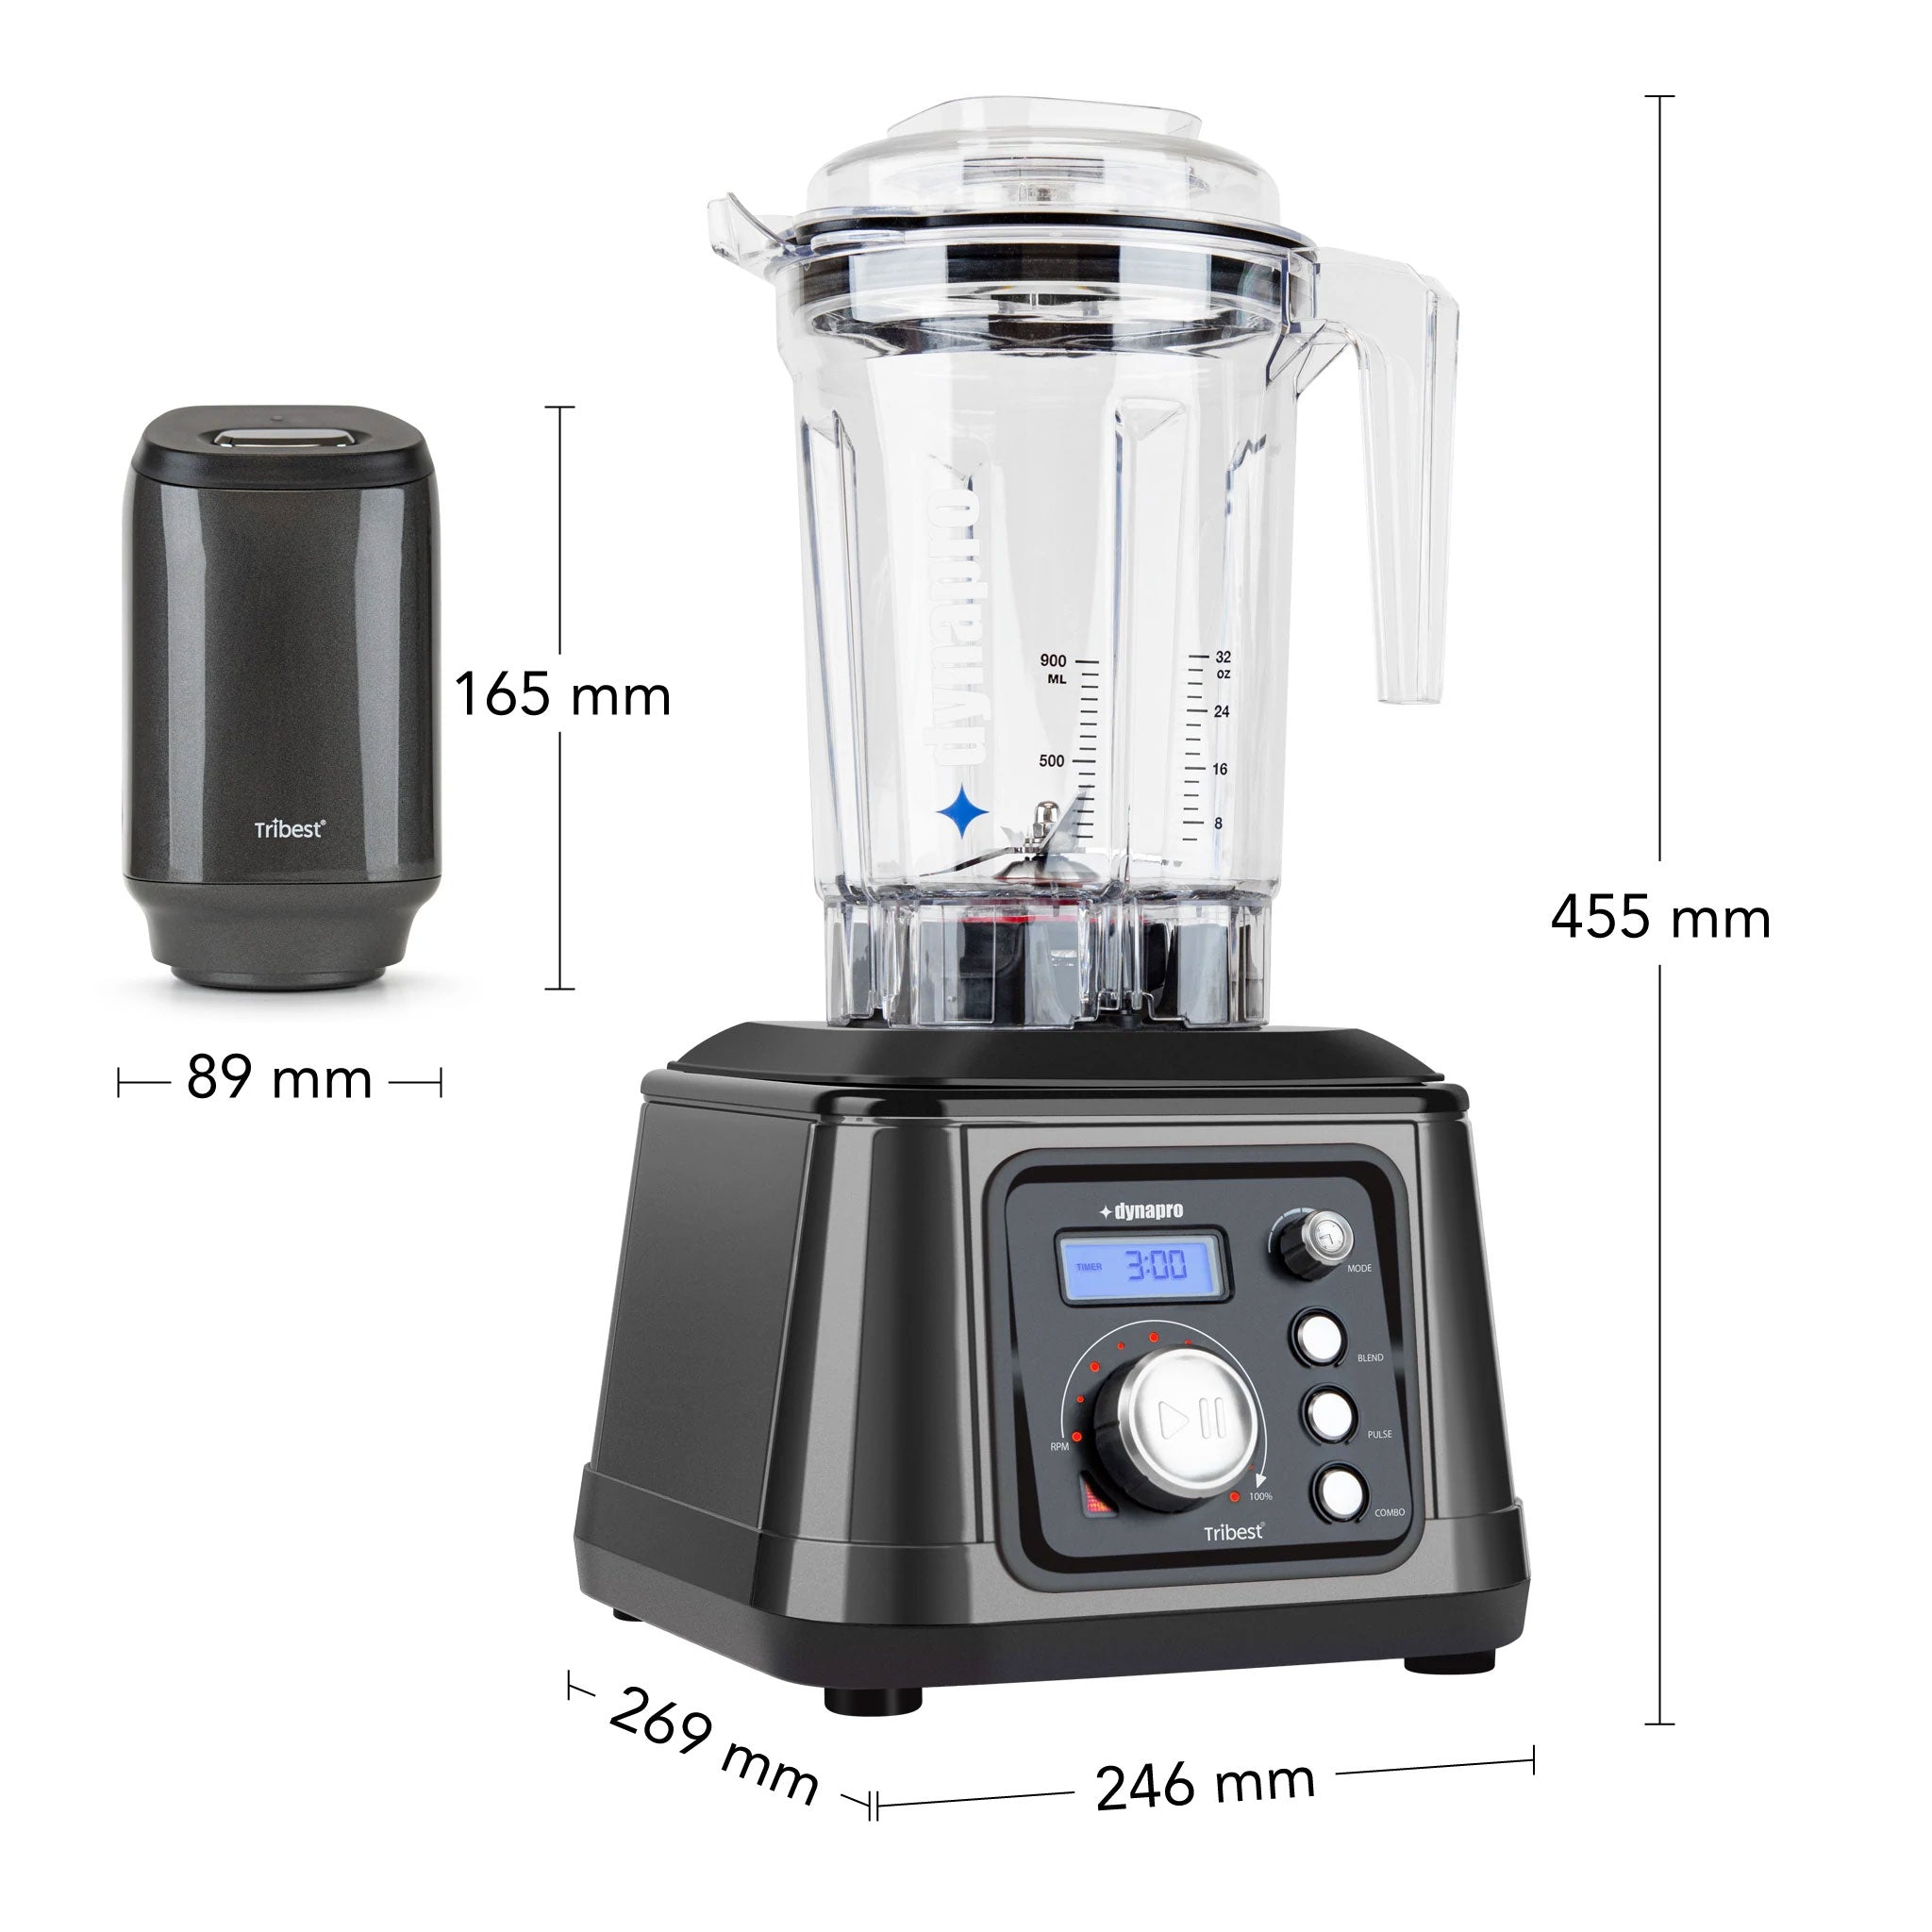 Dynapro® Commercial High-Speed Vacuum Blender in Gray - Size 246 x 269 x 455 mm